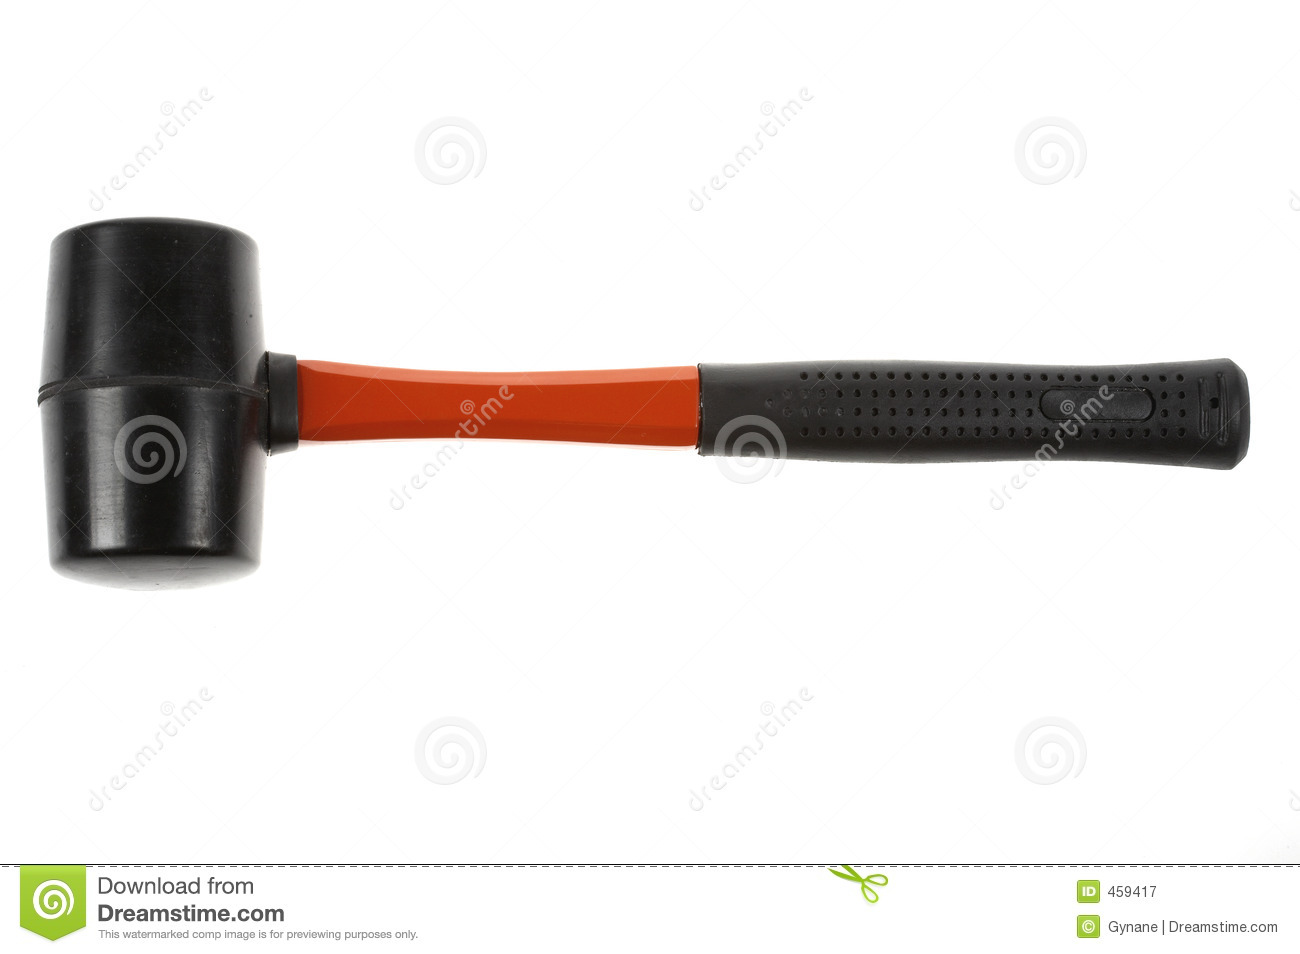 Rubber Mallet Royalty Free Stock Photography   Image  459417